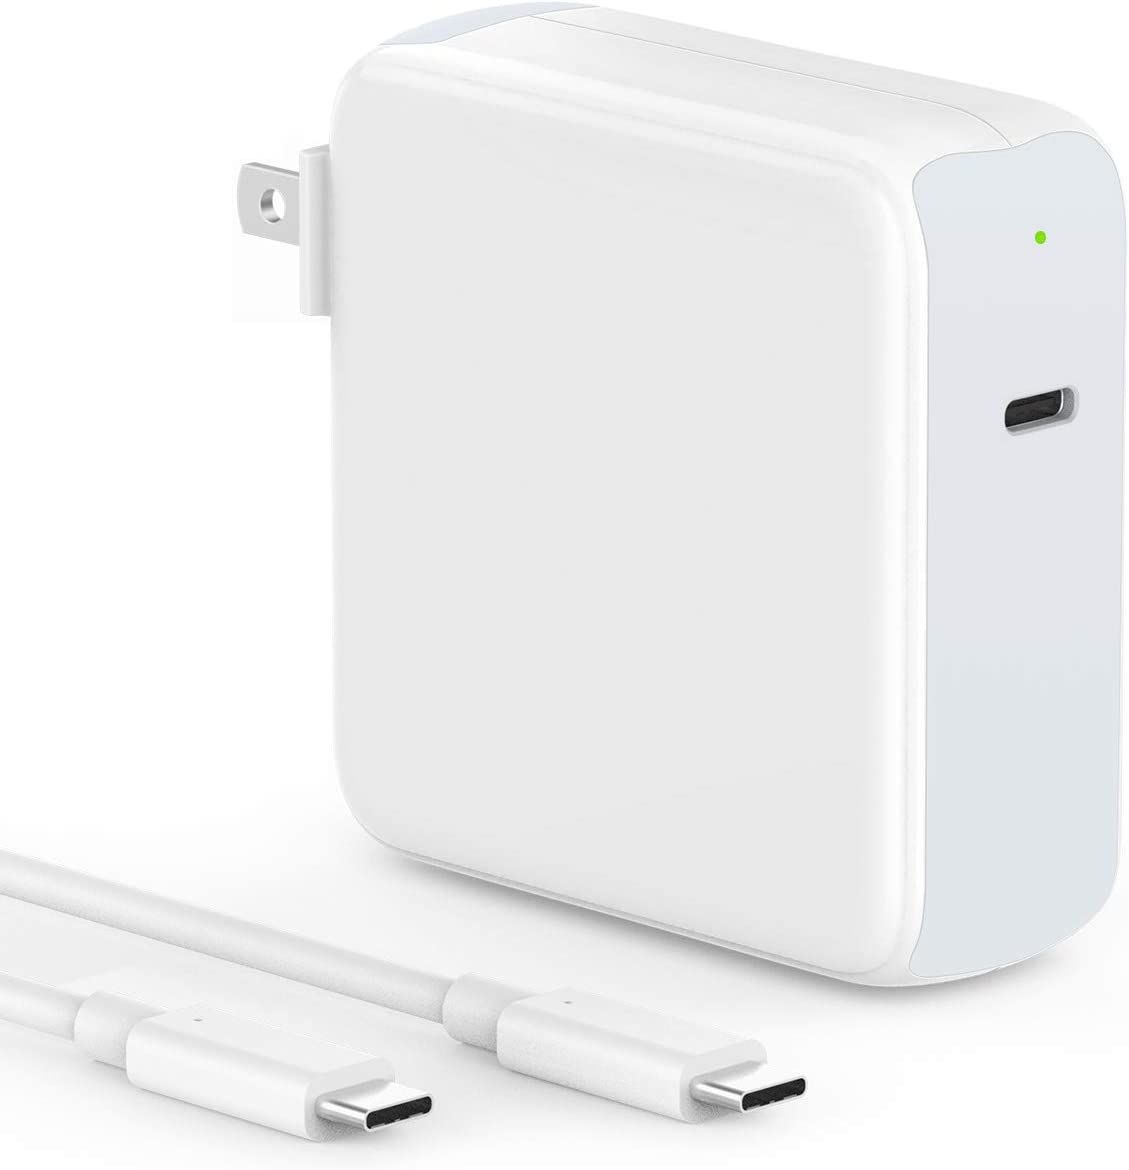 This fast charger supports up to 96W output and comes with a USB C to USB C cable.